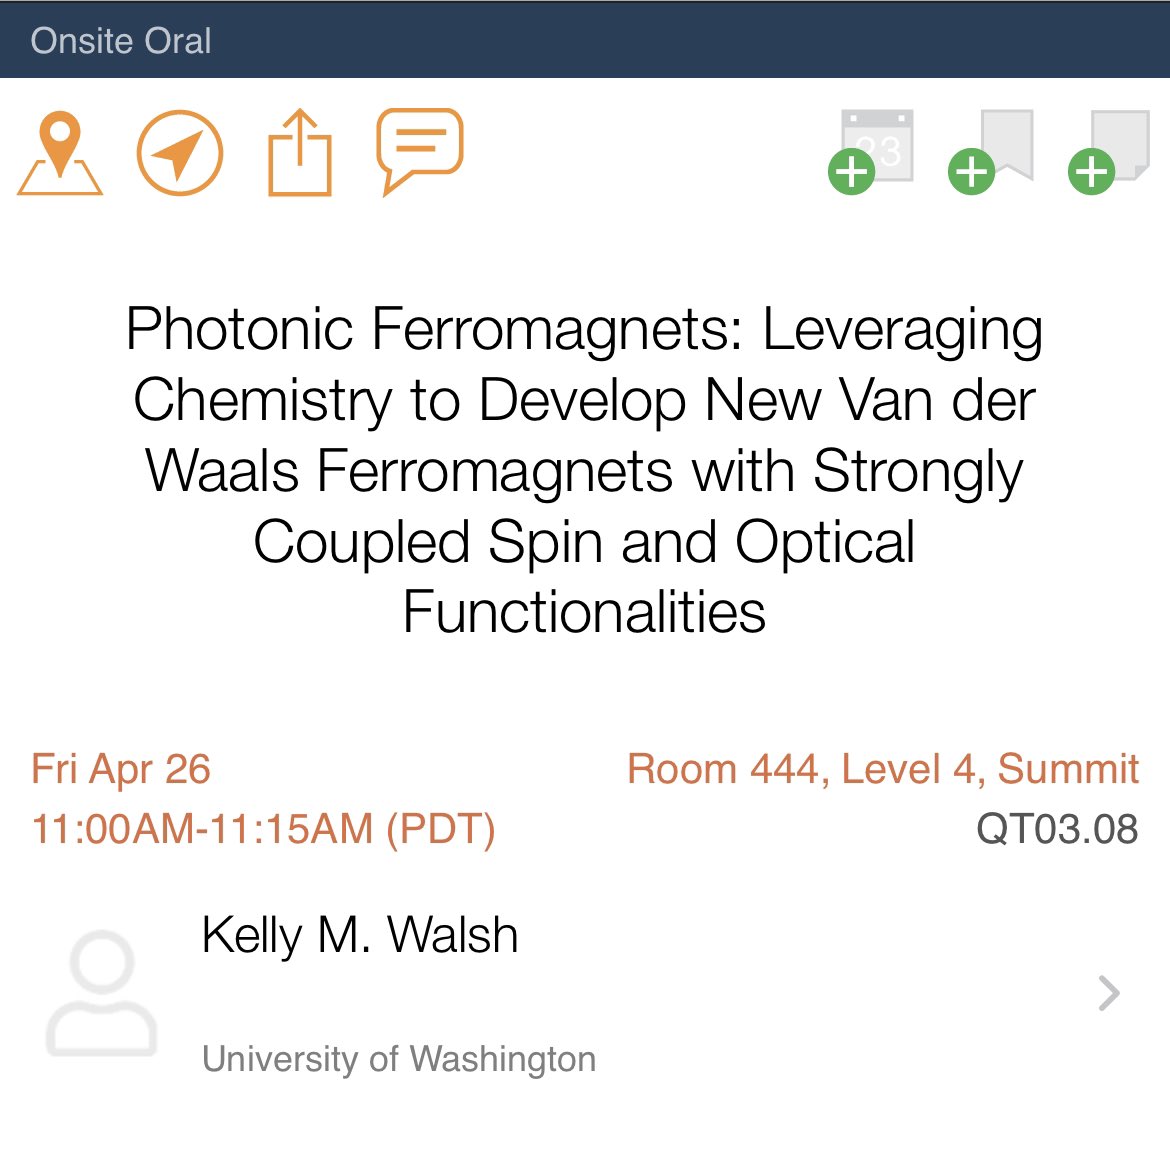 Welcome to Seattle #S24MRS! Swing by my talk on Friday to hear about our recent work on ferromagnetic 2D perovskites, and reach out if you want to meet up before then! Looking forward to hearing all the great talks that are scheduled.